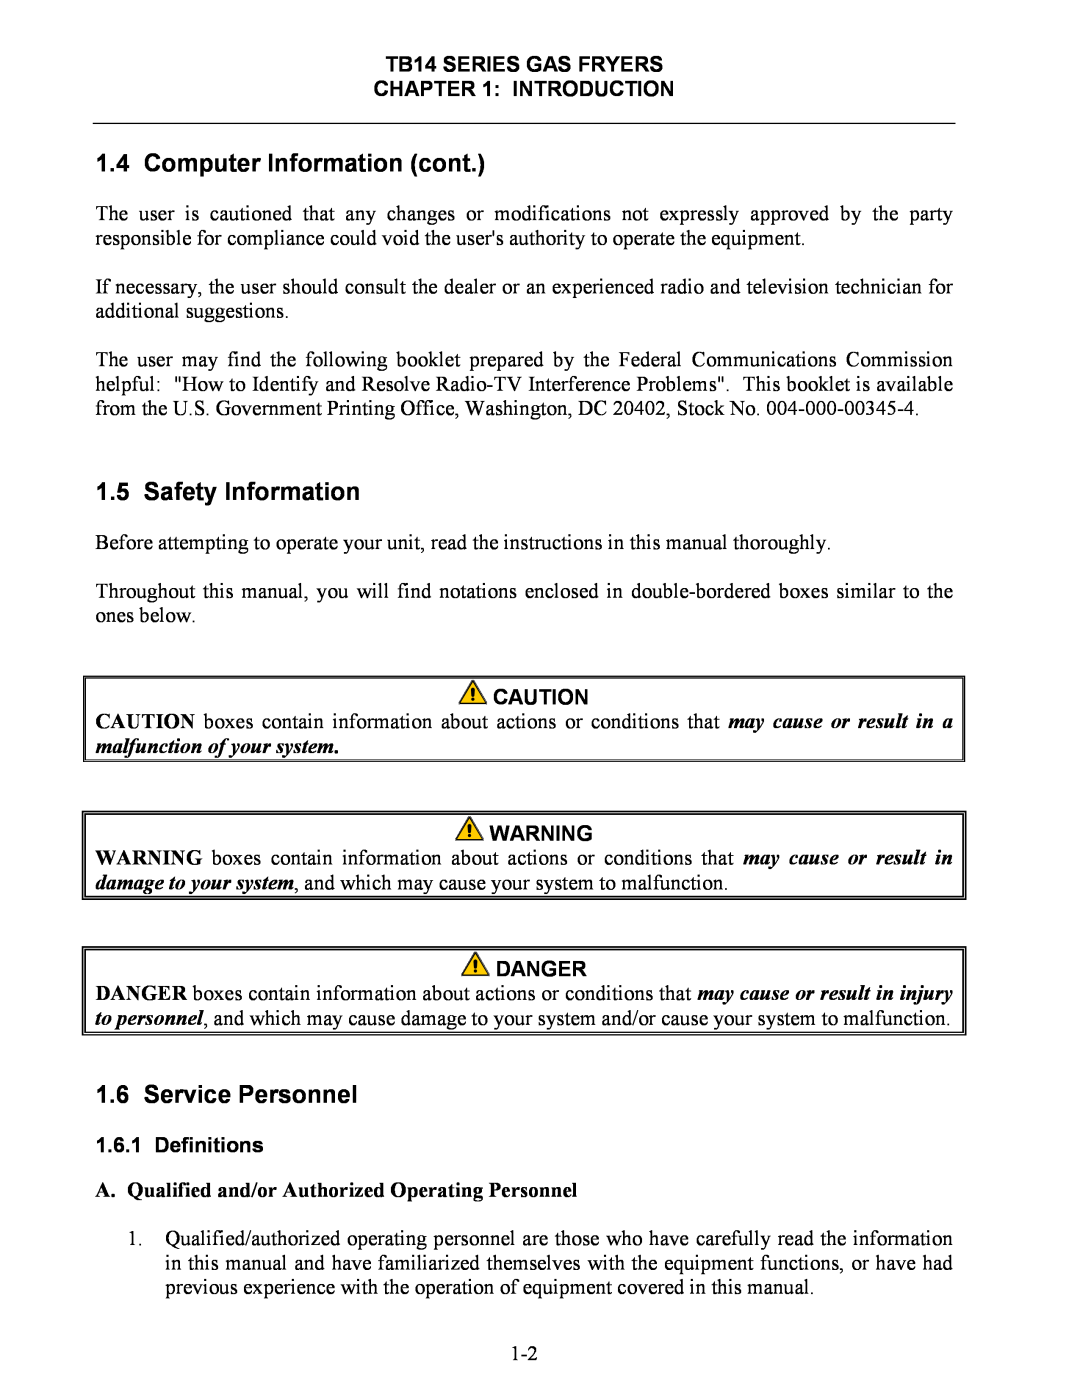 Frymaster Computer Information cont, Safety Information, Service Personnel, TB14 SERIES GAS FRYERS INTRODUCTION, Danger 